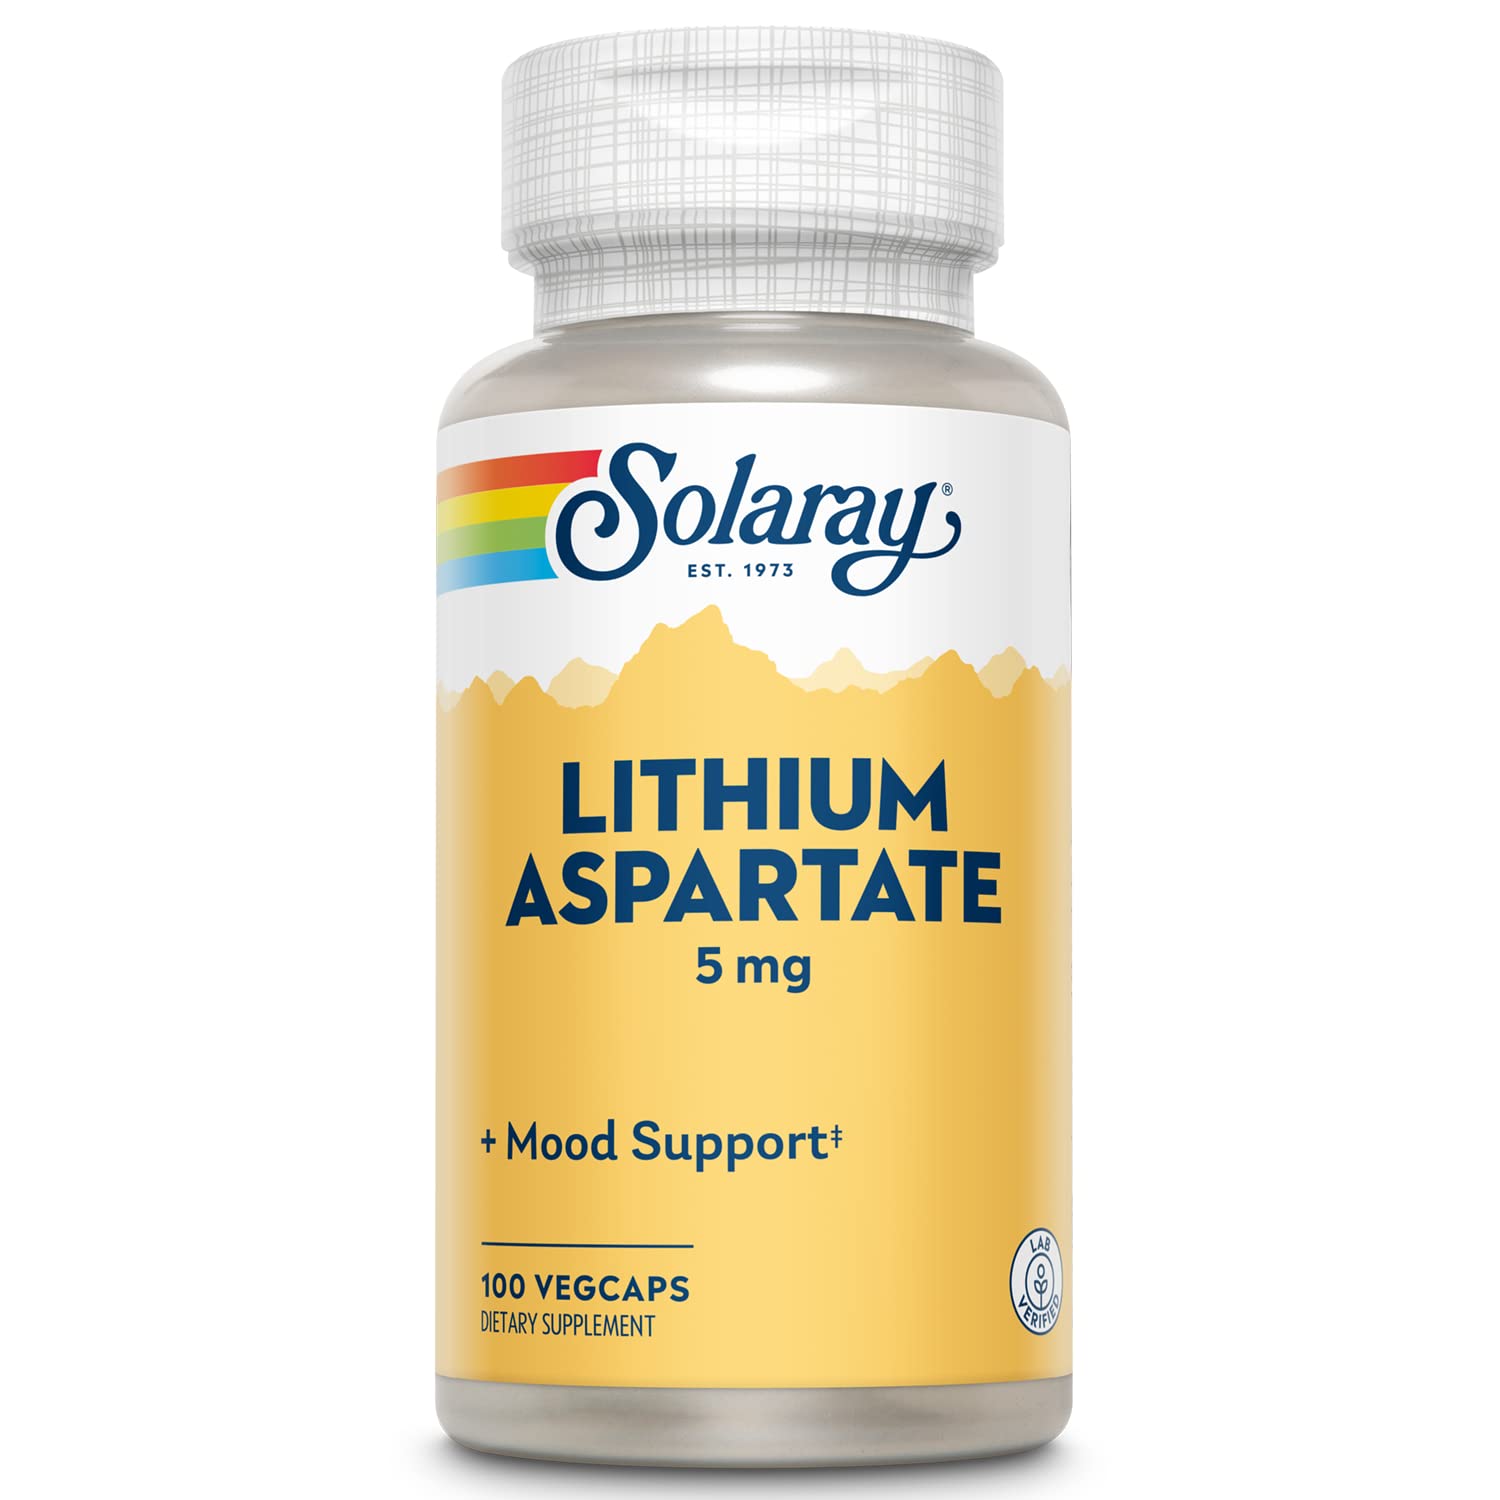 Solaray Lithium Aspartate Supplement, 5 mg | 100 Count